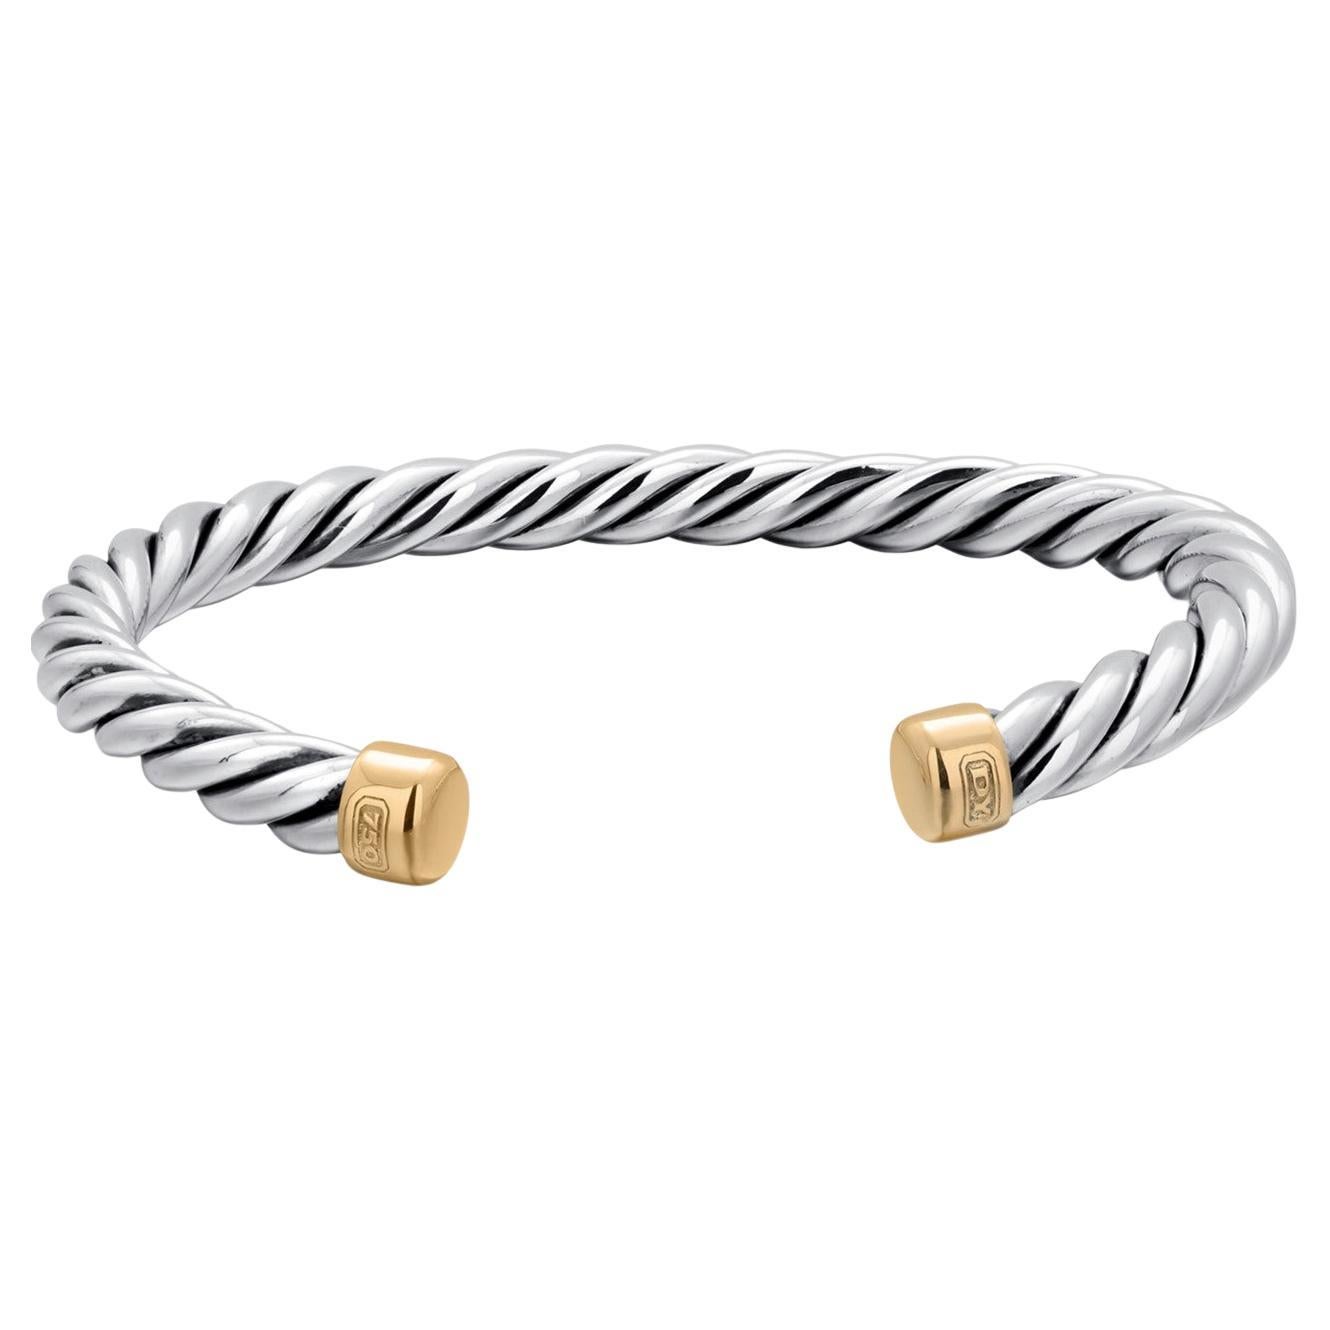 Vintage David Yurman Braided Braided Bracelet in 18K Gold and Sterling Silver For Sale